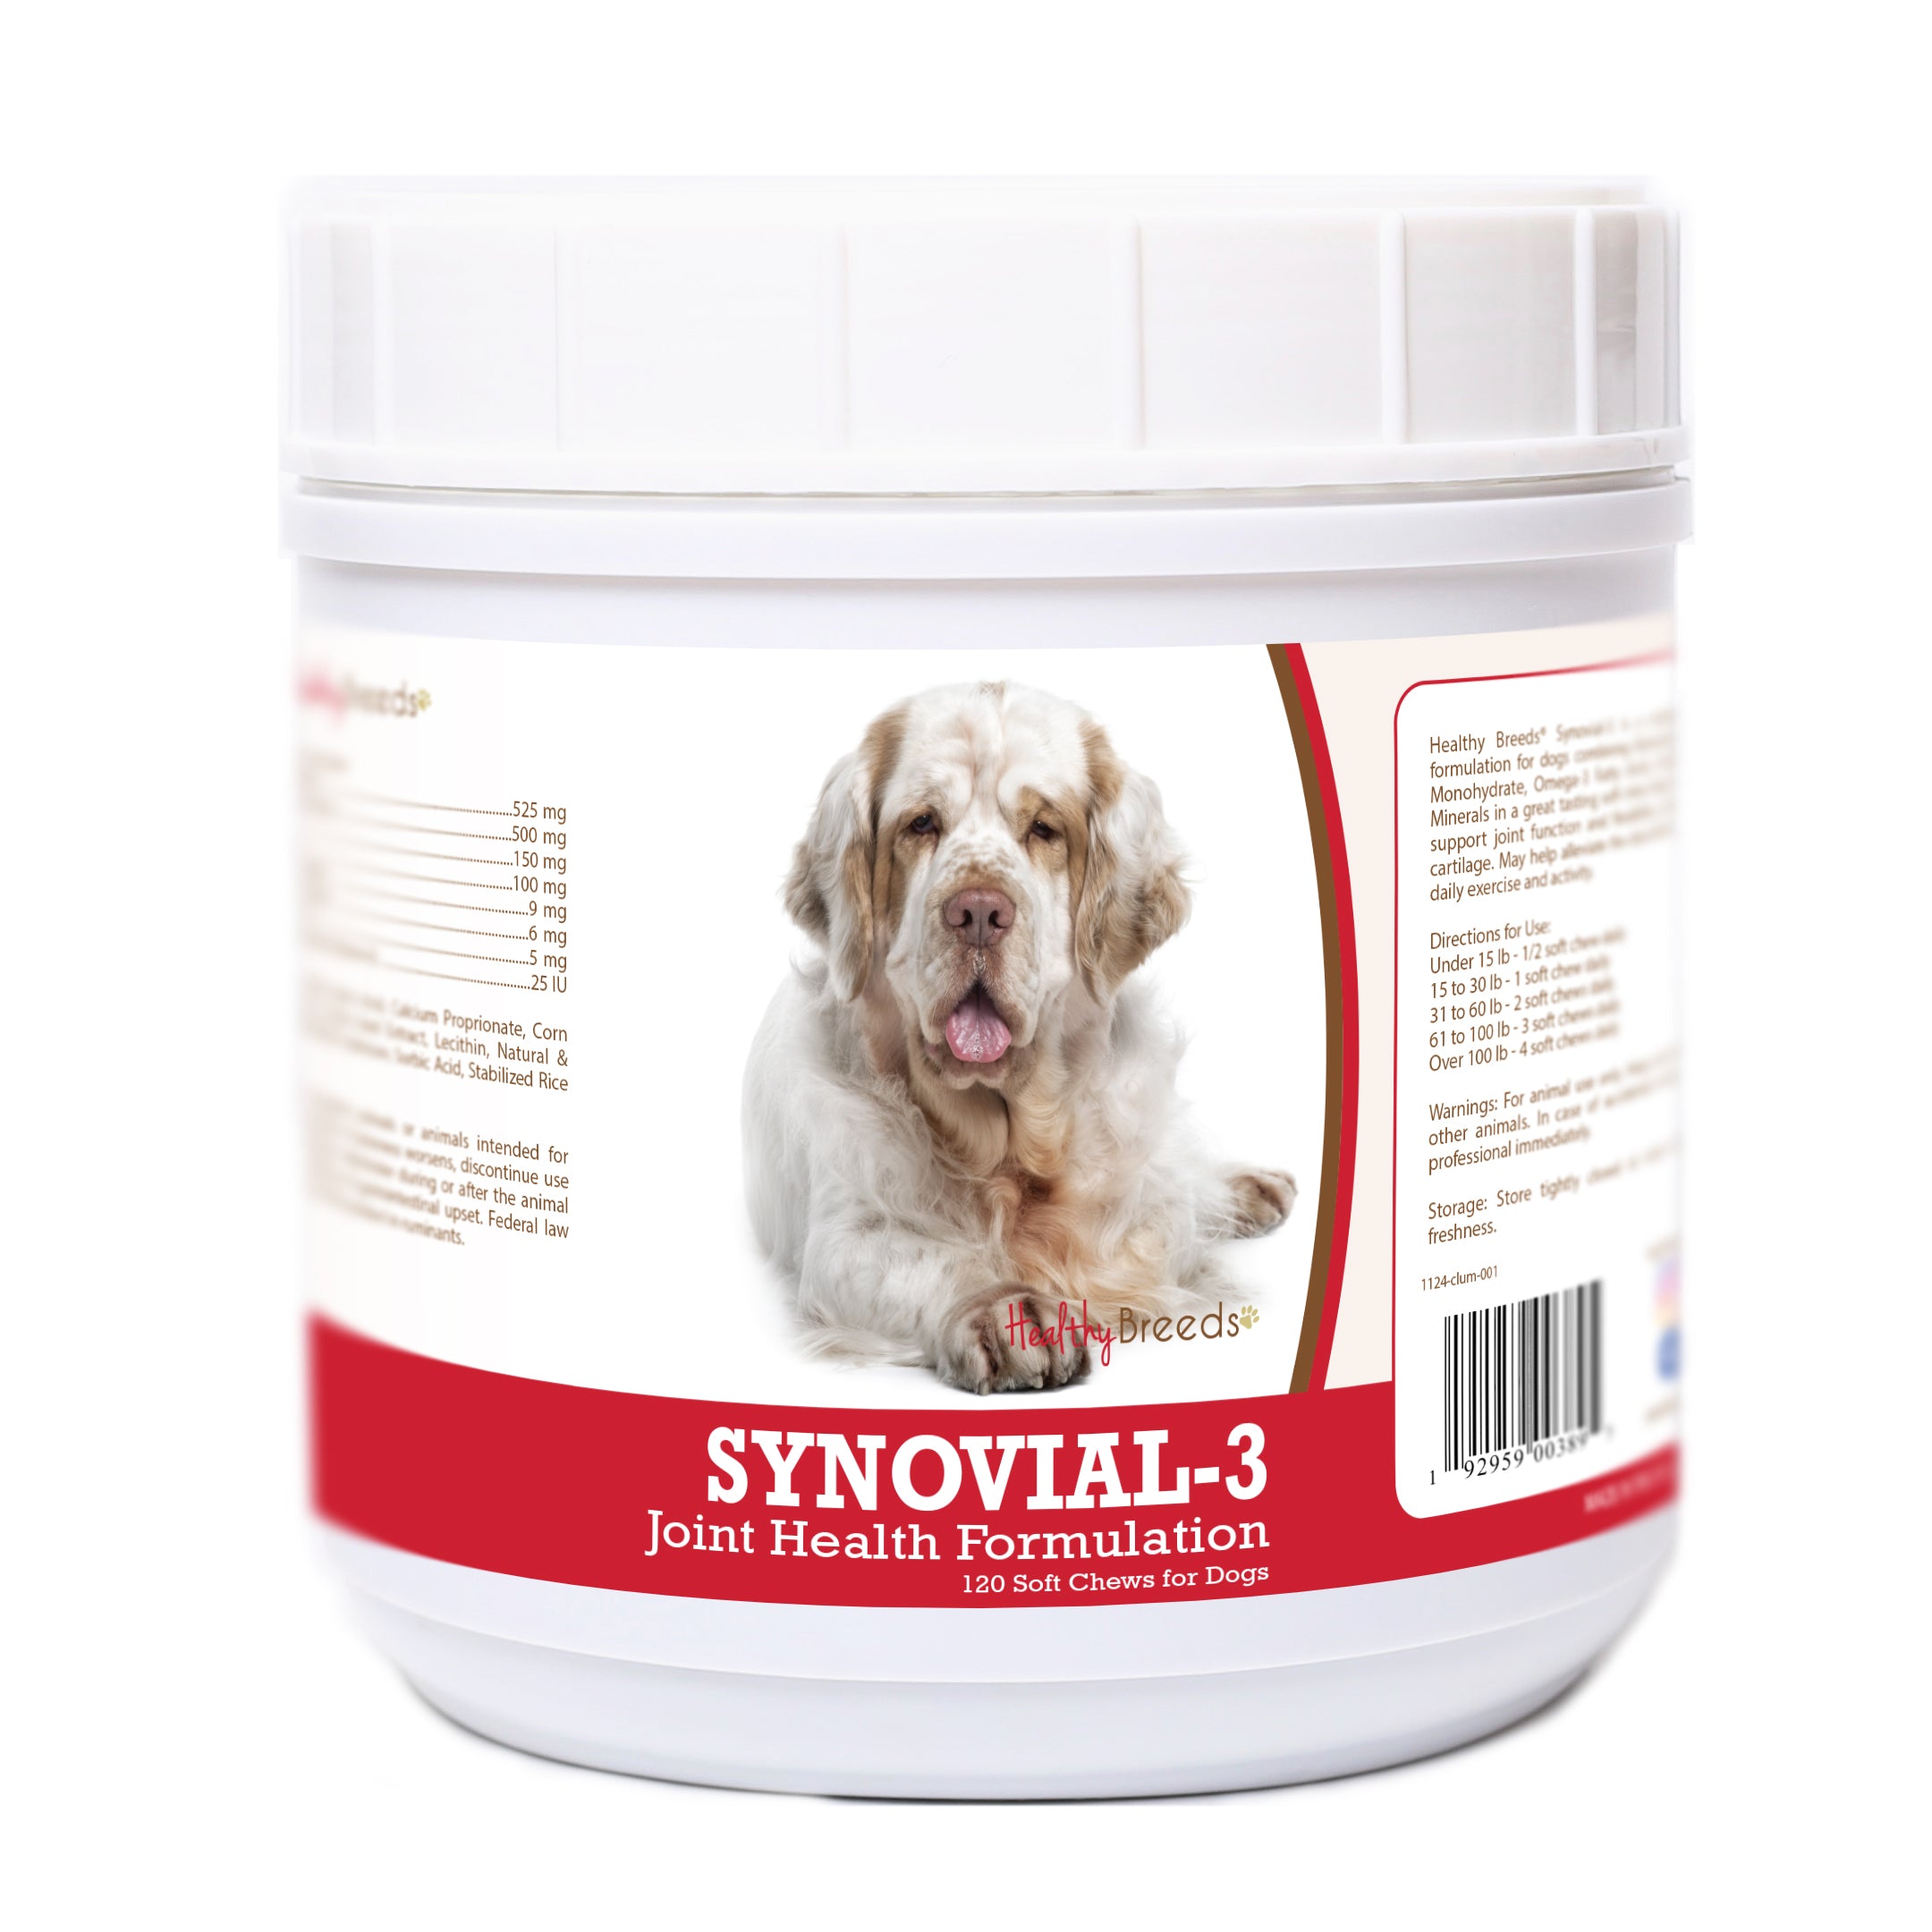 Clumber Spaniel Synovial-3 Joint Health Formulation Soft Chews 120 Count